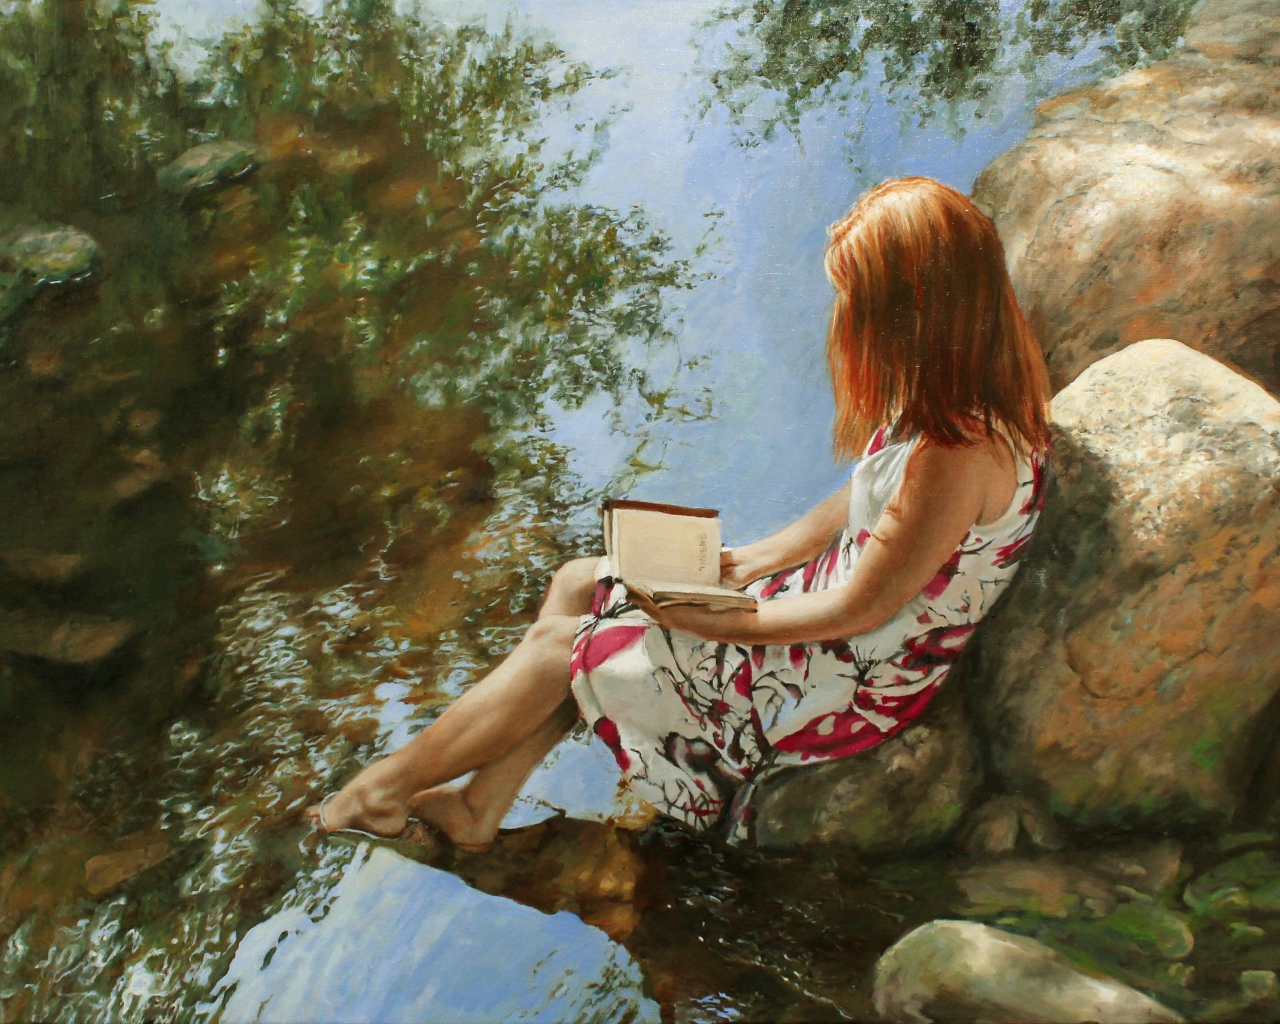 A painted girl with a book sits on a stone by the water